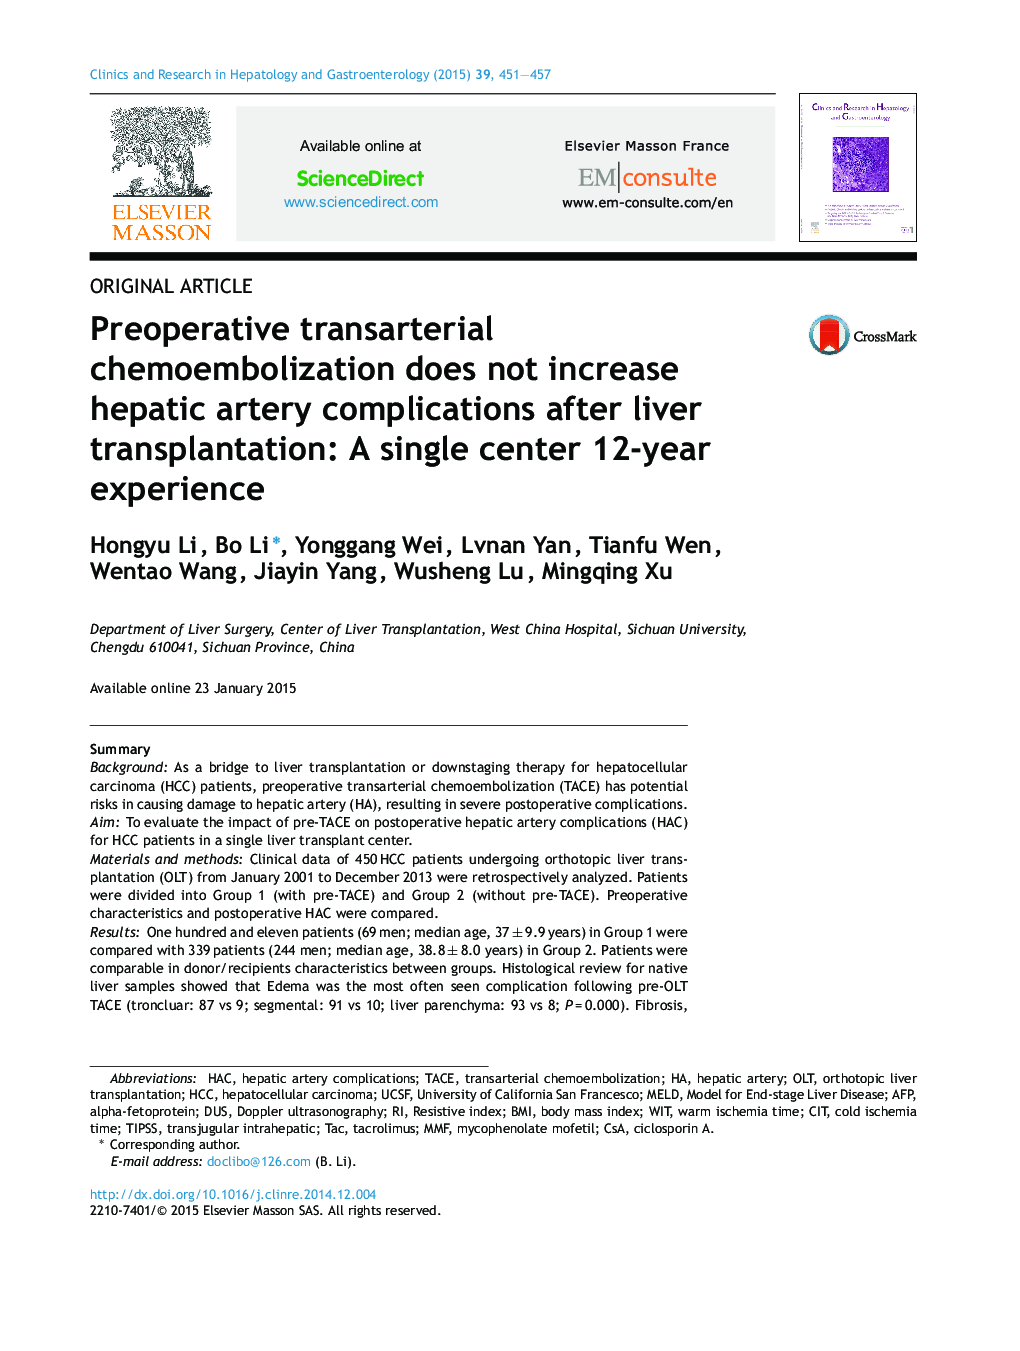 Preoperative transarterial chemoembolization does not increase hepatic artery complications after liver transplantation: A single center 12-year experience